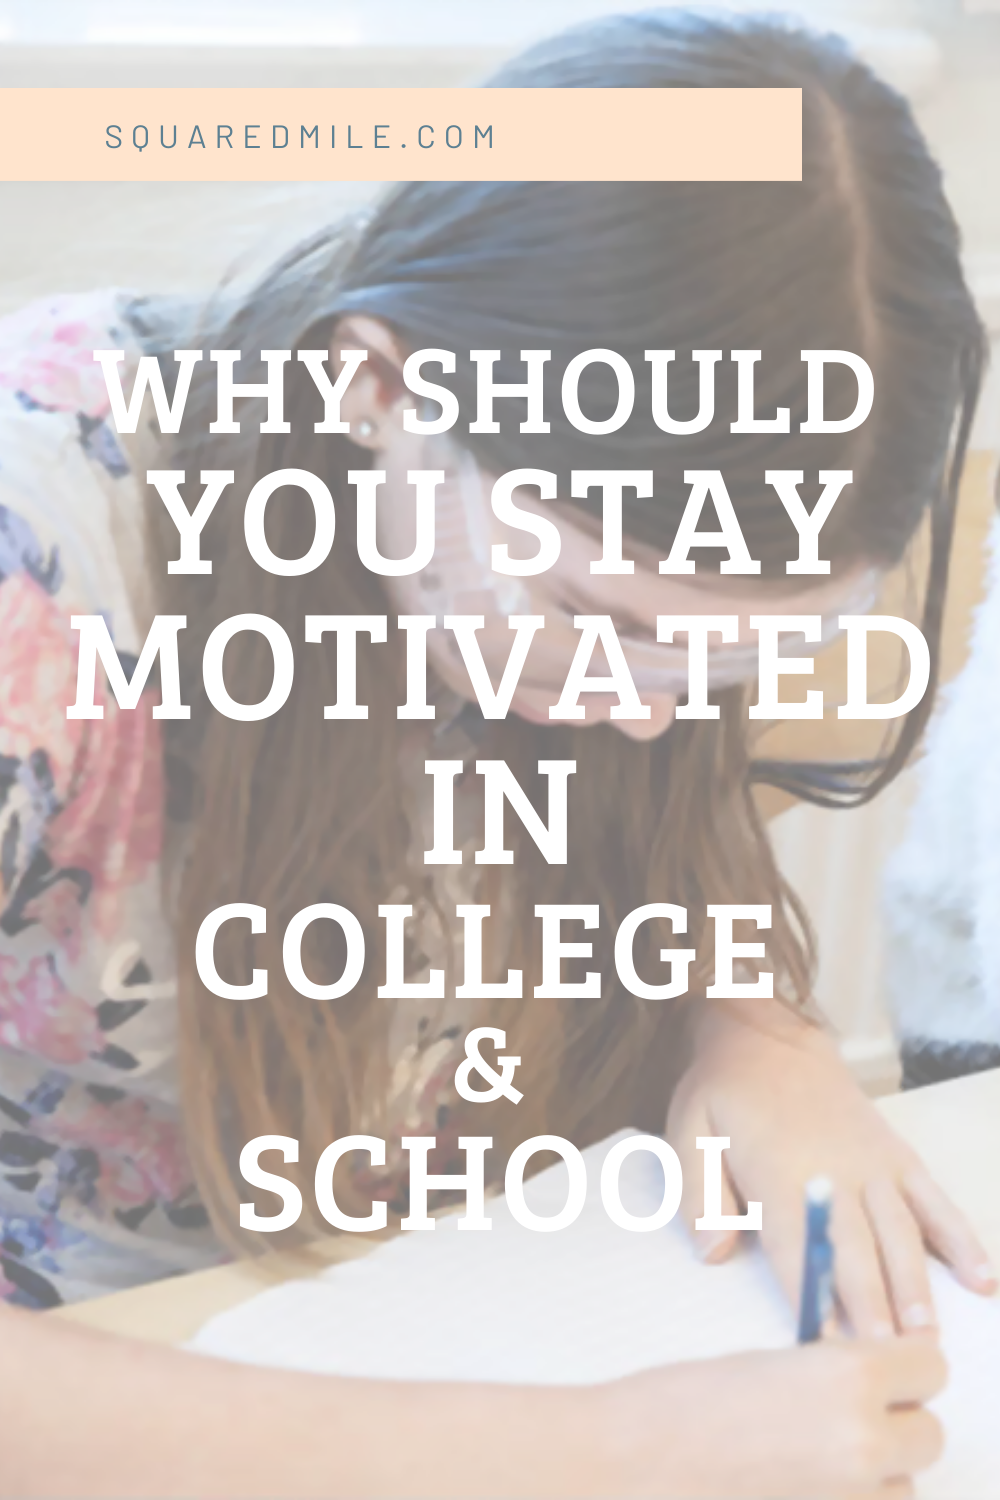 Why Should You Stay Motivated in College and School?